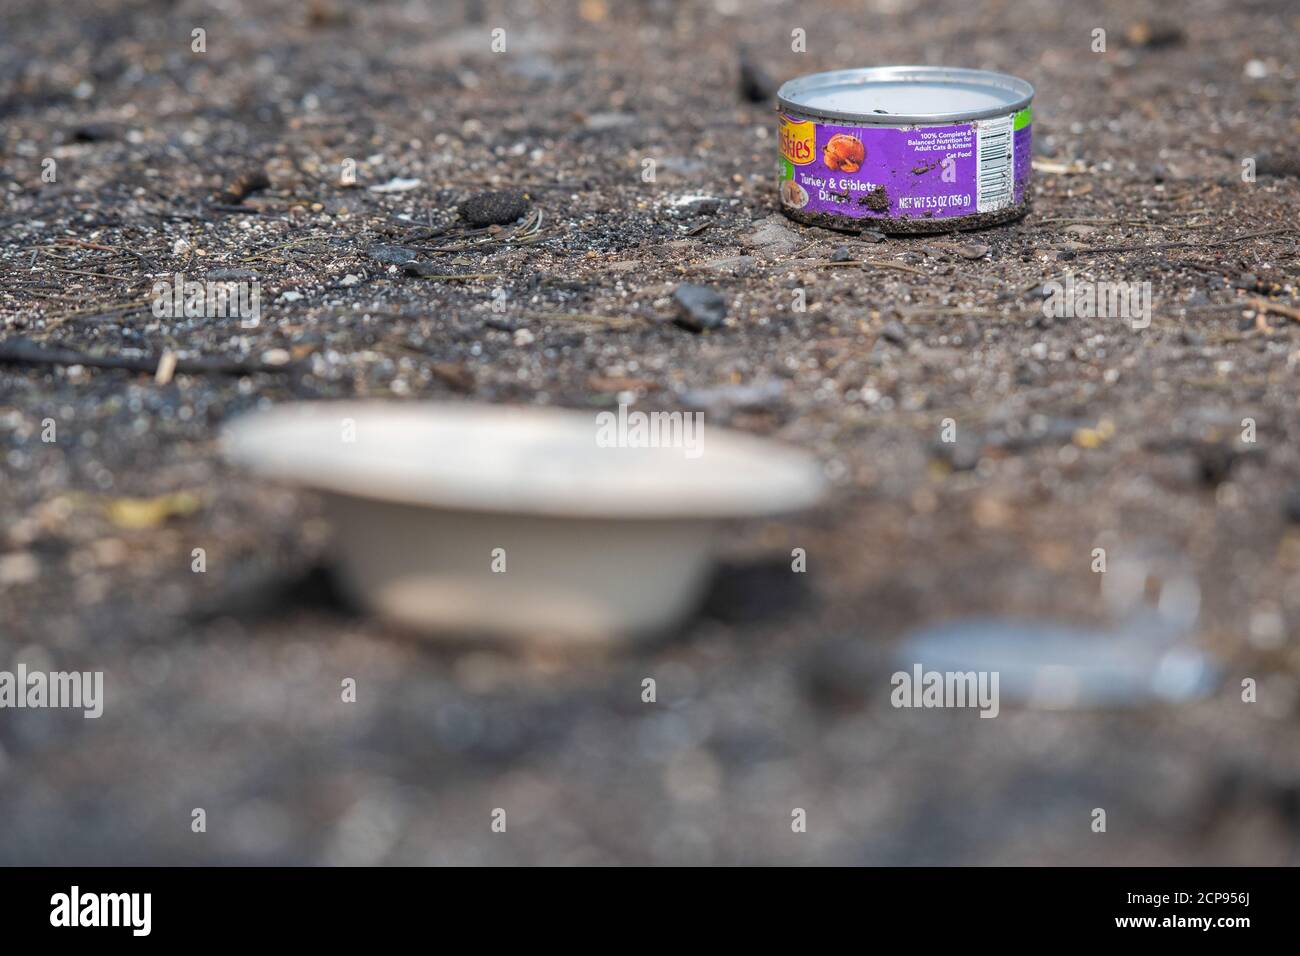 Talent, Ore. 18th Sep, 2020. A general view of cat food left out for cats that are missing amid the aftermath of the Almeda Fire. The town of Talent, Oregon, showing the burned out homes, cars and rubble left behind. In Talent, about 20 miles north of the California border, homes were charred beyond recognition. Across the western US, at least 87 wildfires are burning, according to the National Interagency Fire Center. They've torched more than 4.7 million acres -- more than six times the area of Rhode Island. Credit: Chris Tuite/Image Space/Media Punch/Alamy Live News Stock Photo